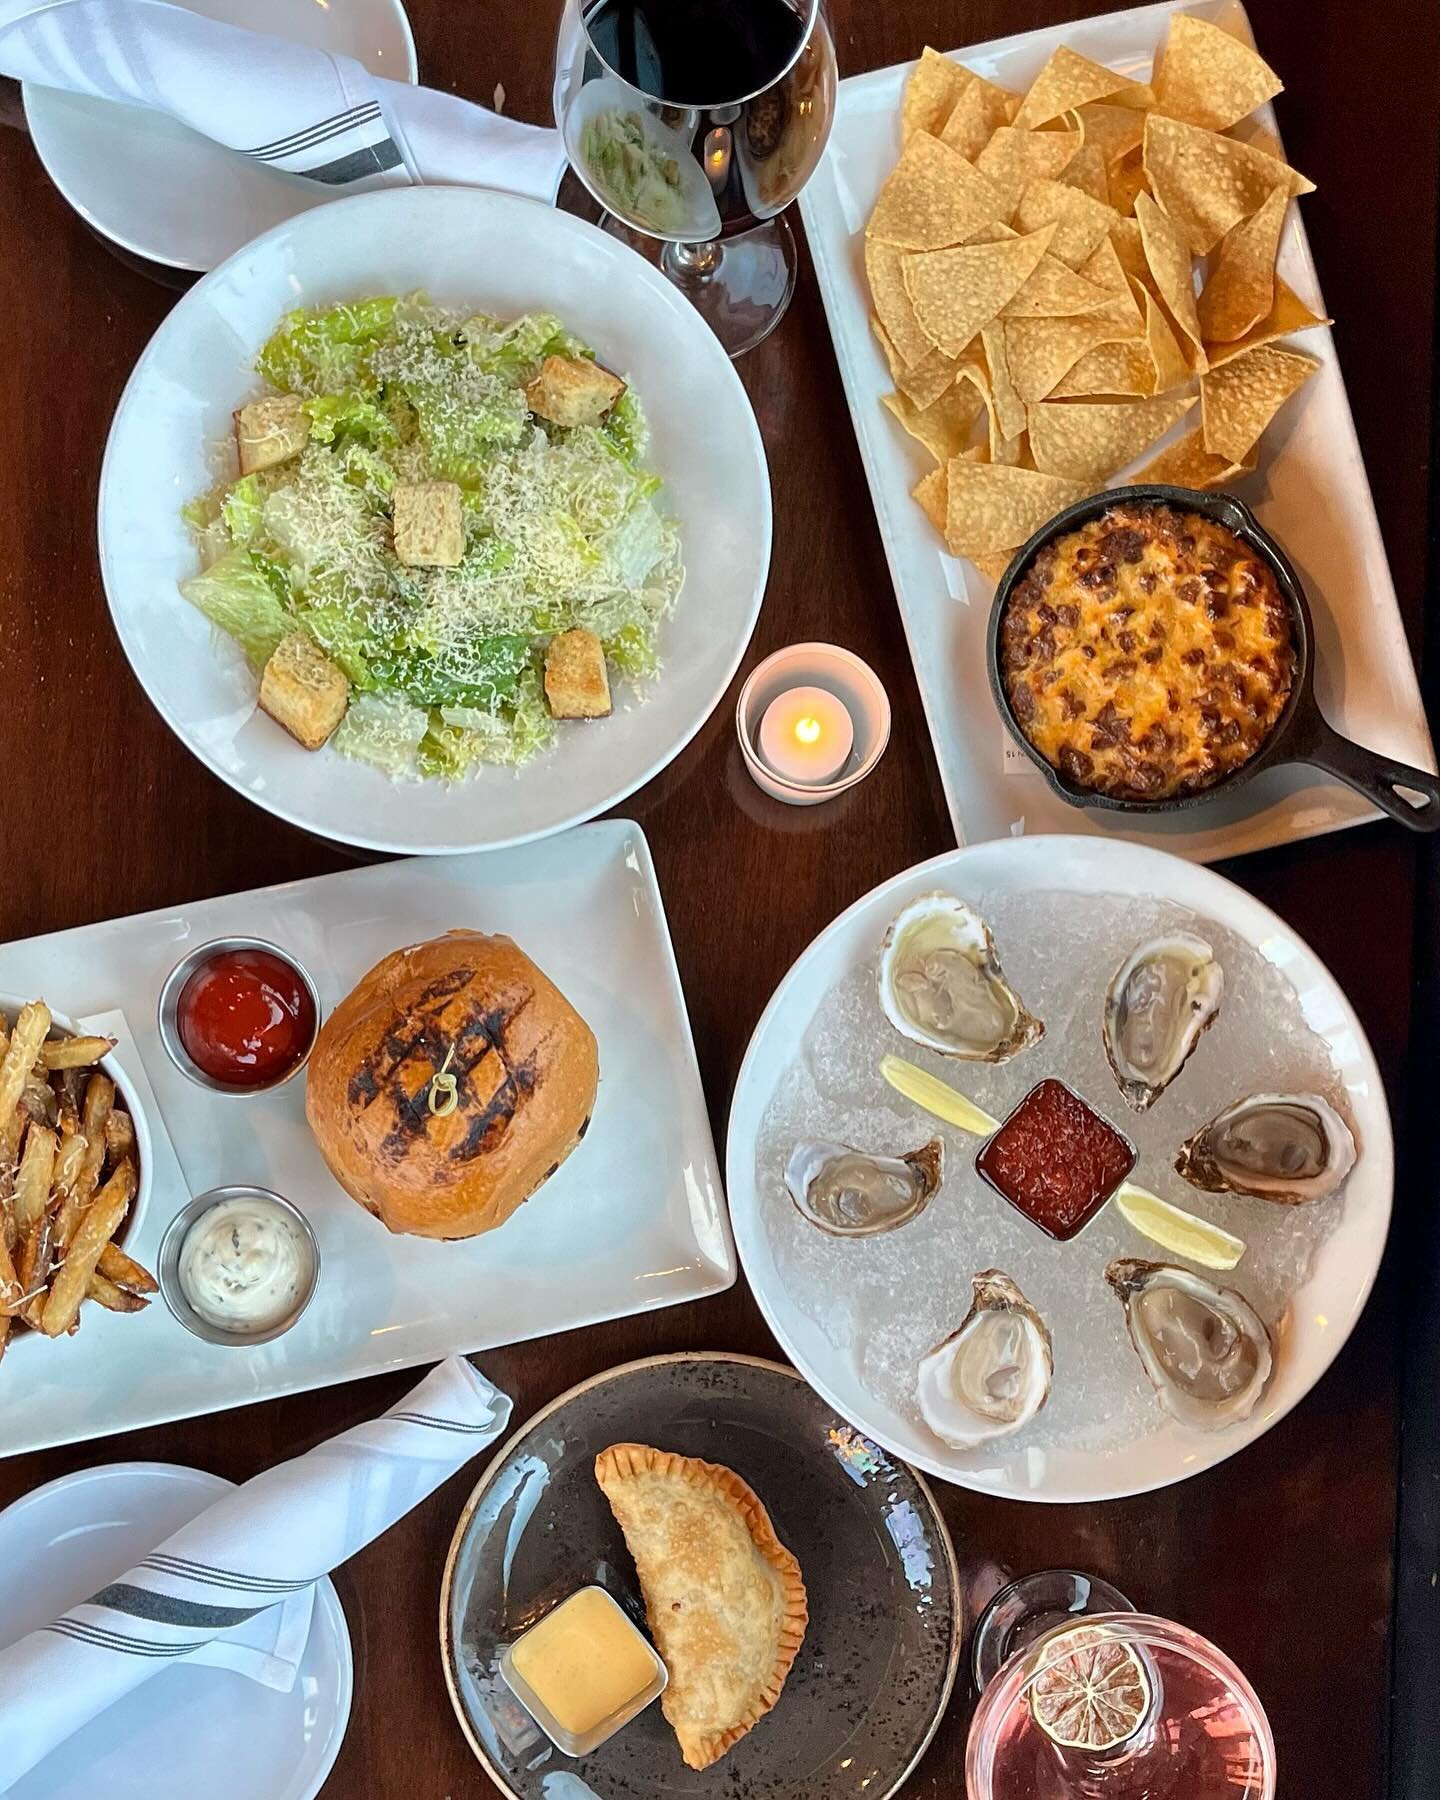 Happy Hour is daily from 3-6PM 

What does your Happy Hour table look like? 
&bull;
&bull;
#publickhouse #westfield #mountainside #gastropub #food #happyhour #njhappyhour